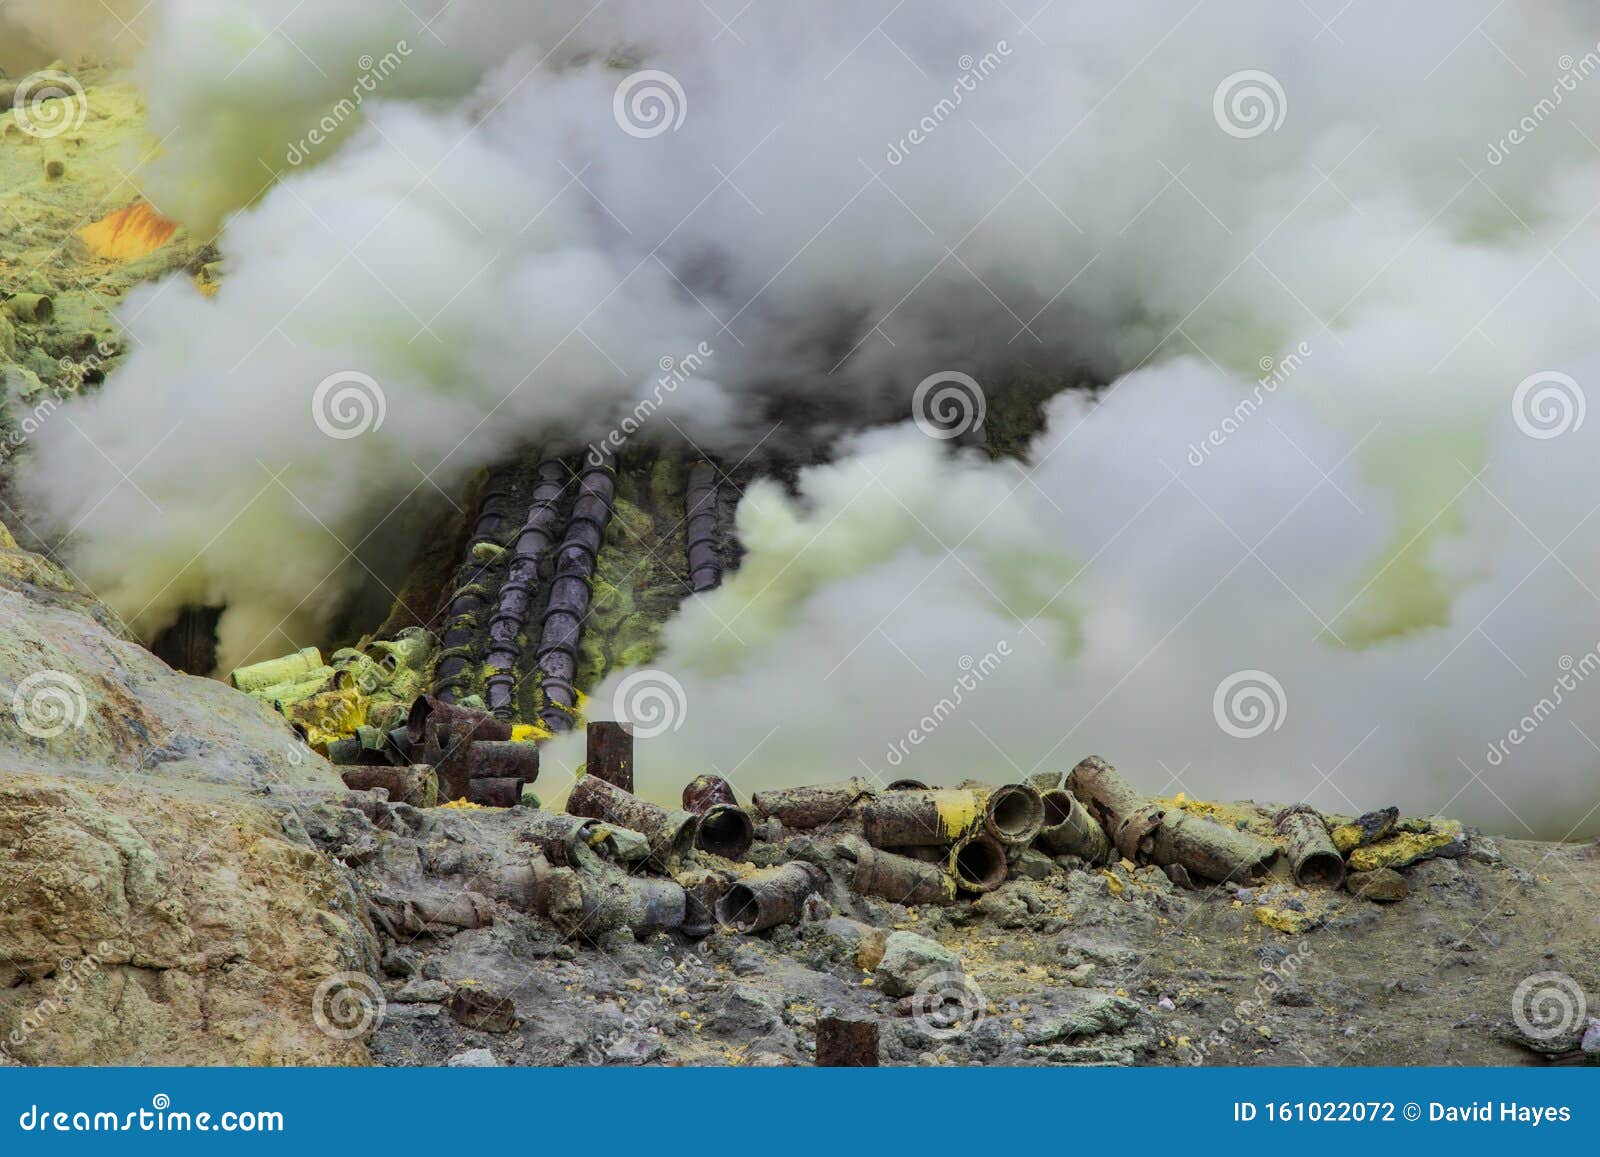 sulfur mining operation in mount ijen, indonesia. toxic gas escaping from volcanic vents. pipes to divert the gas for condensing t